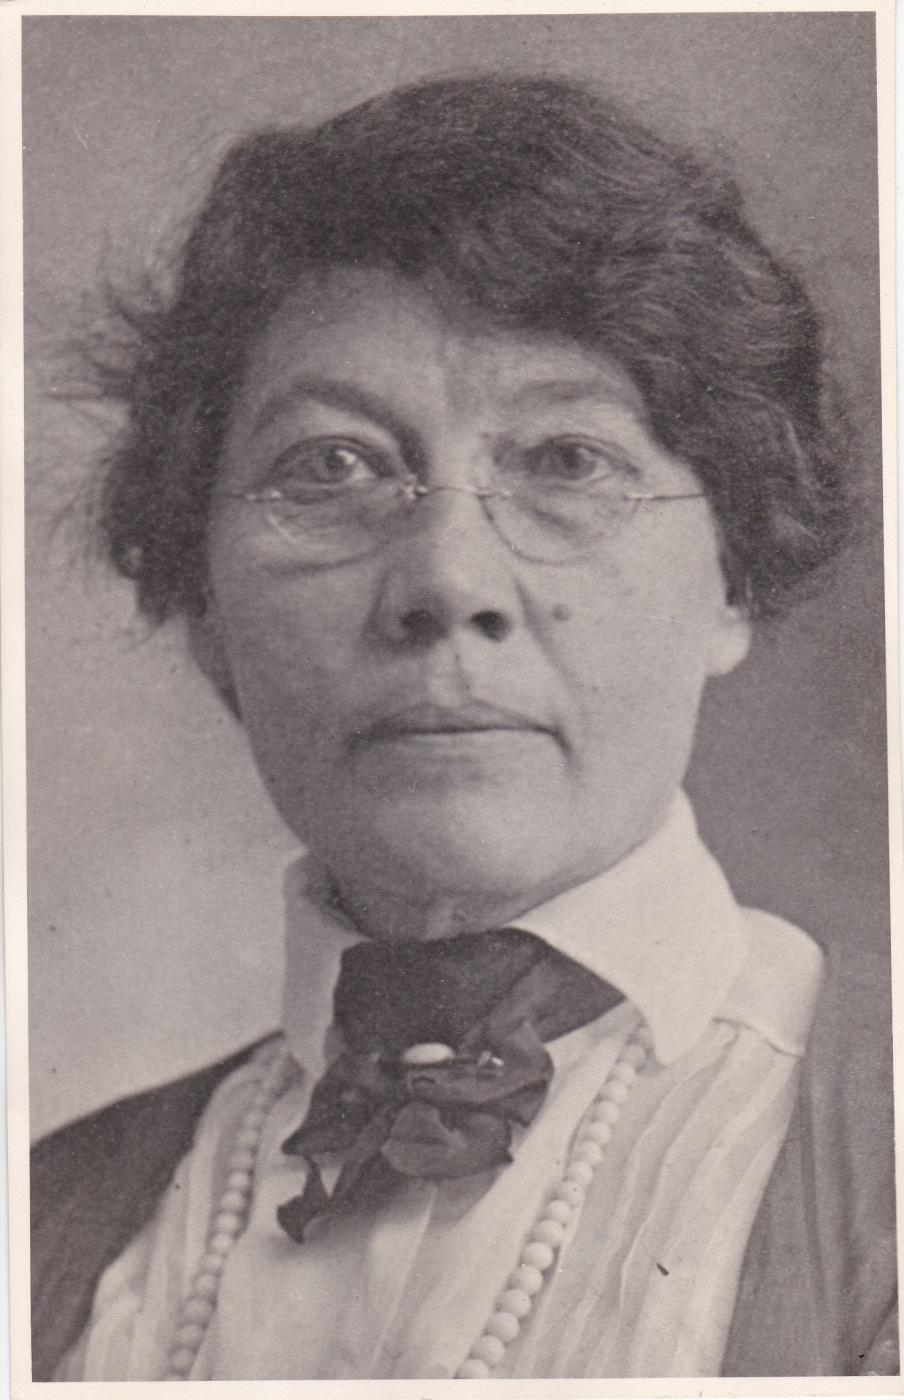 Black and white photograph of Mary Elizabeth Campbell, probably taken around 1919.  She is wearing small half-glasses, and a dark dress over white blouse with a ribbon rosette at the throat.  She also appears to be wearing a string of pearls.